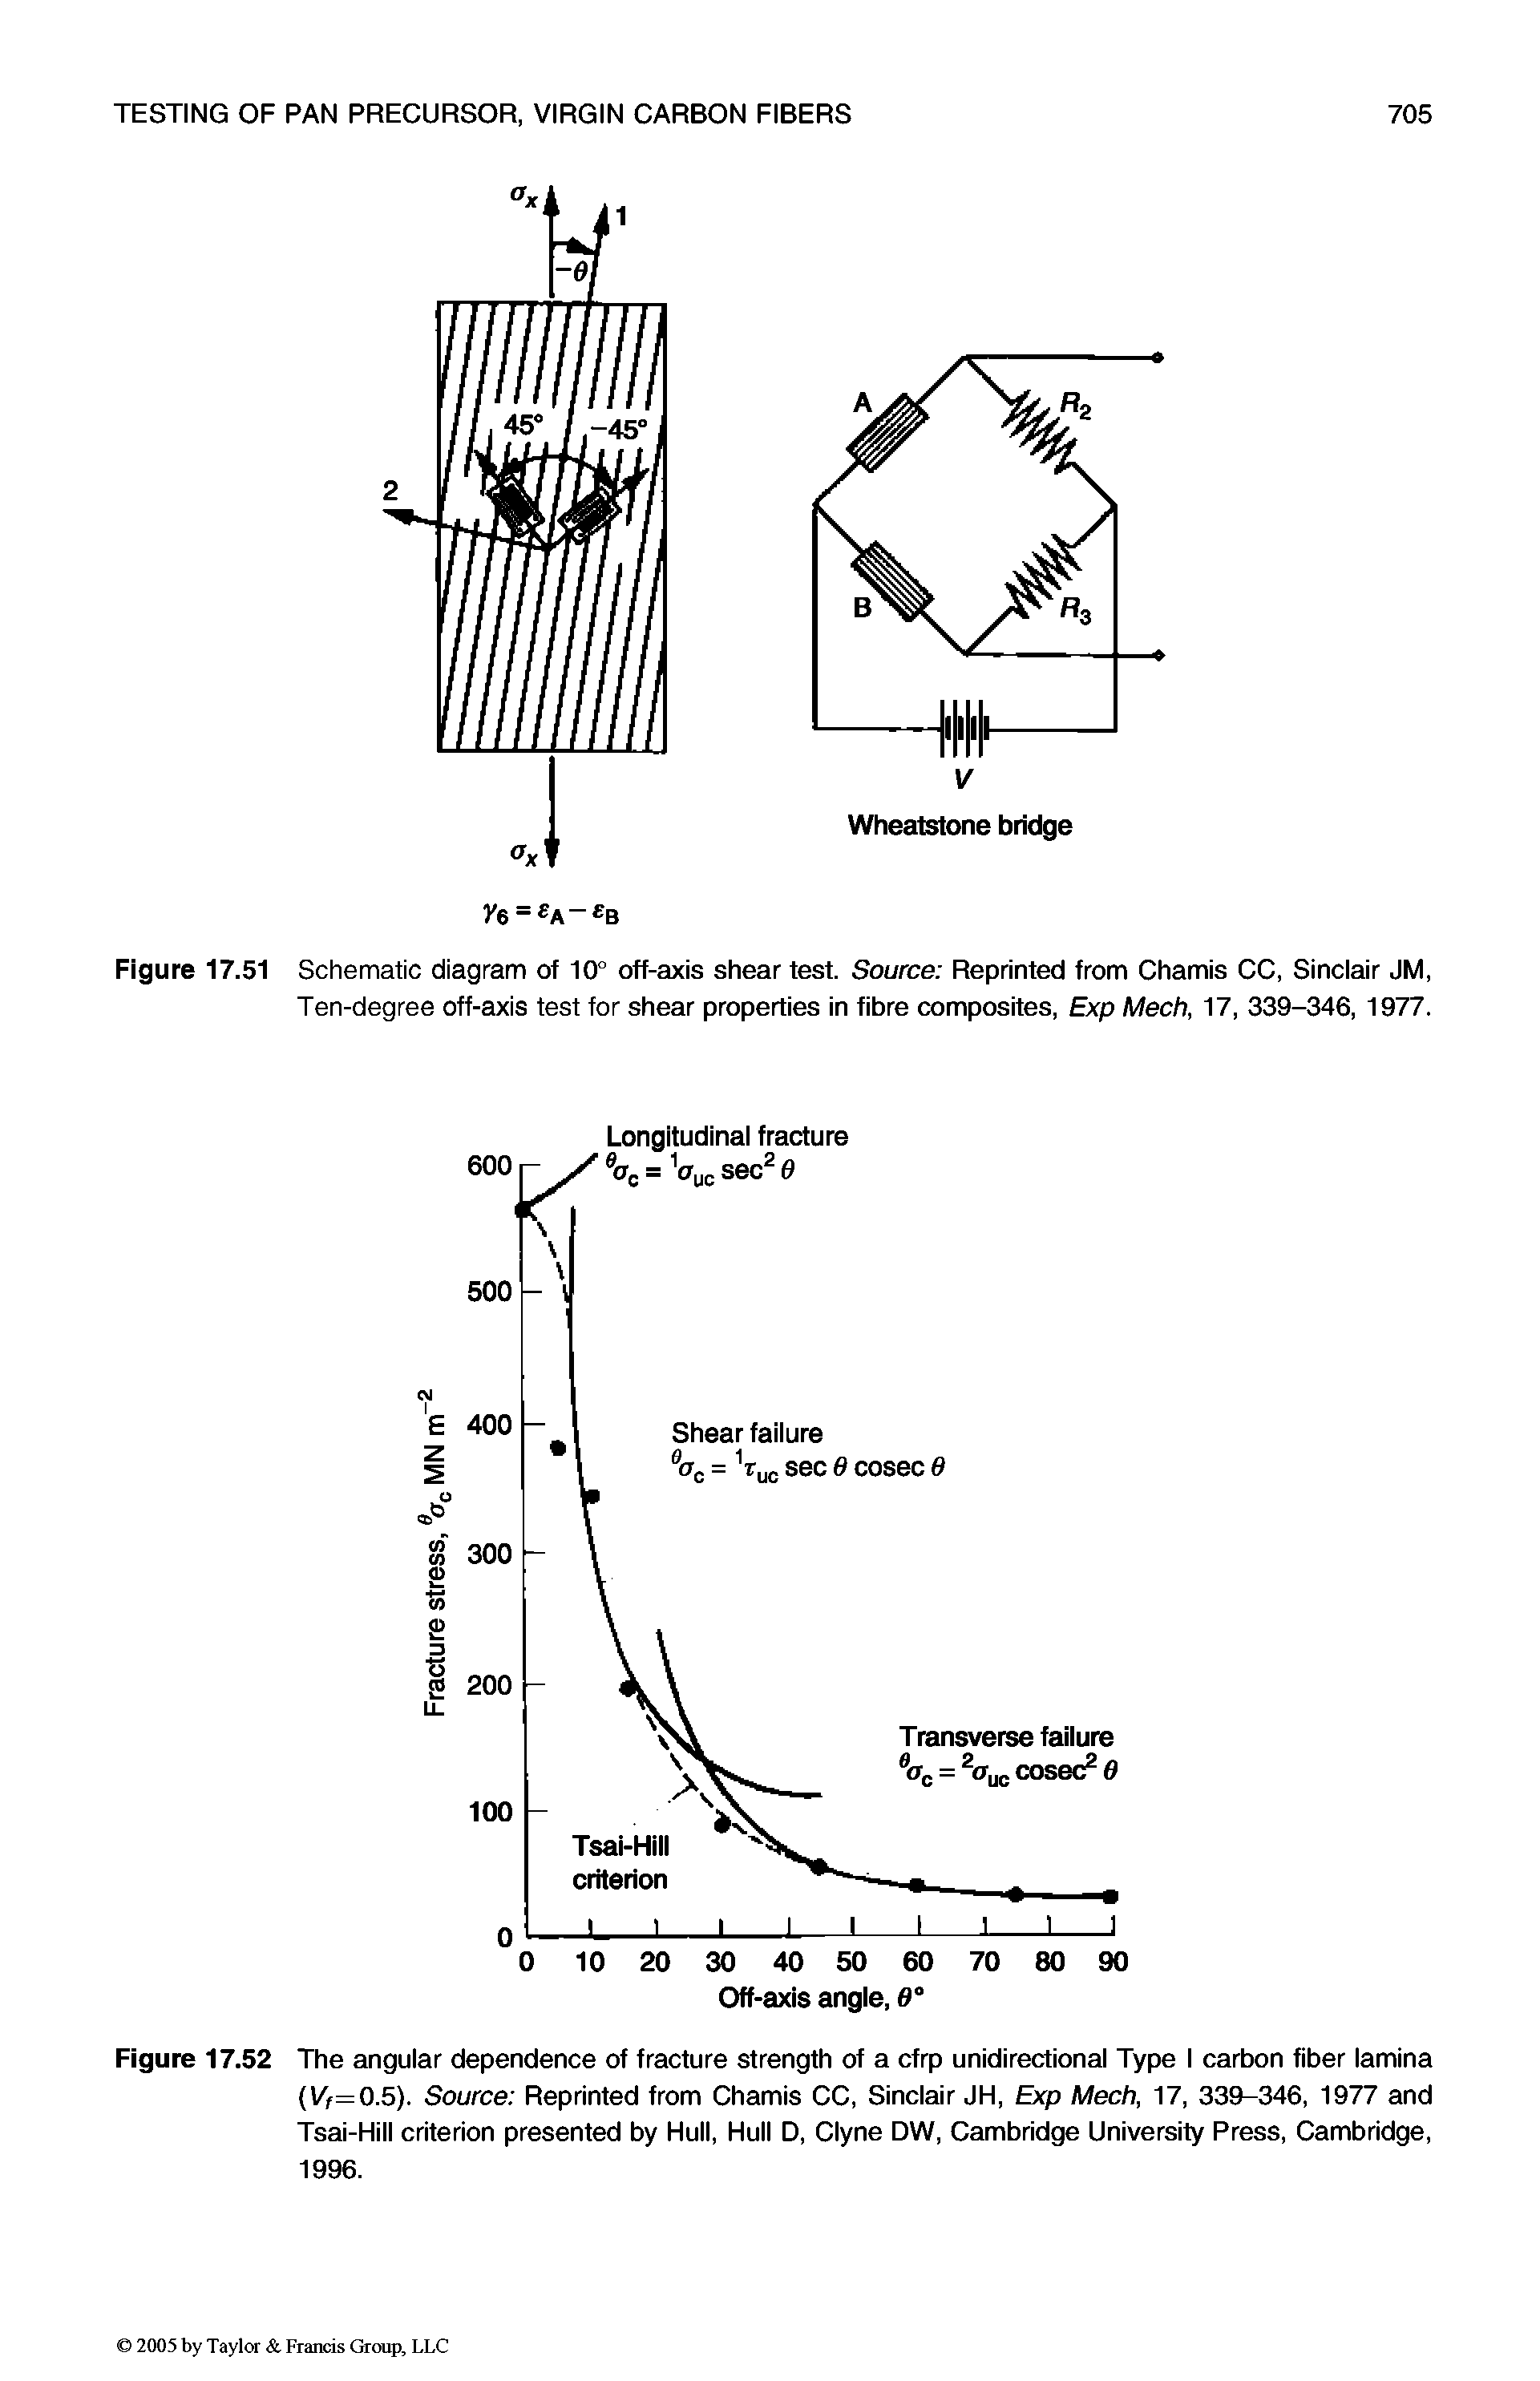 Figure 17.52 The angular dependence of fracture strength of a cfrp unidirectional Type I carbon fiber lamina Vf=0.5). Source Reprinted from Chamis CC, Sinclair JH, Exp Mech, 17, 339-346, 1977 and Tsai-Hill criterion presented by Hull, Hull D, Clyne DW, Cambridge University Press, Cambridge, 1996.